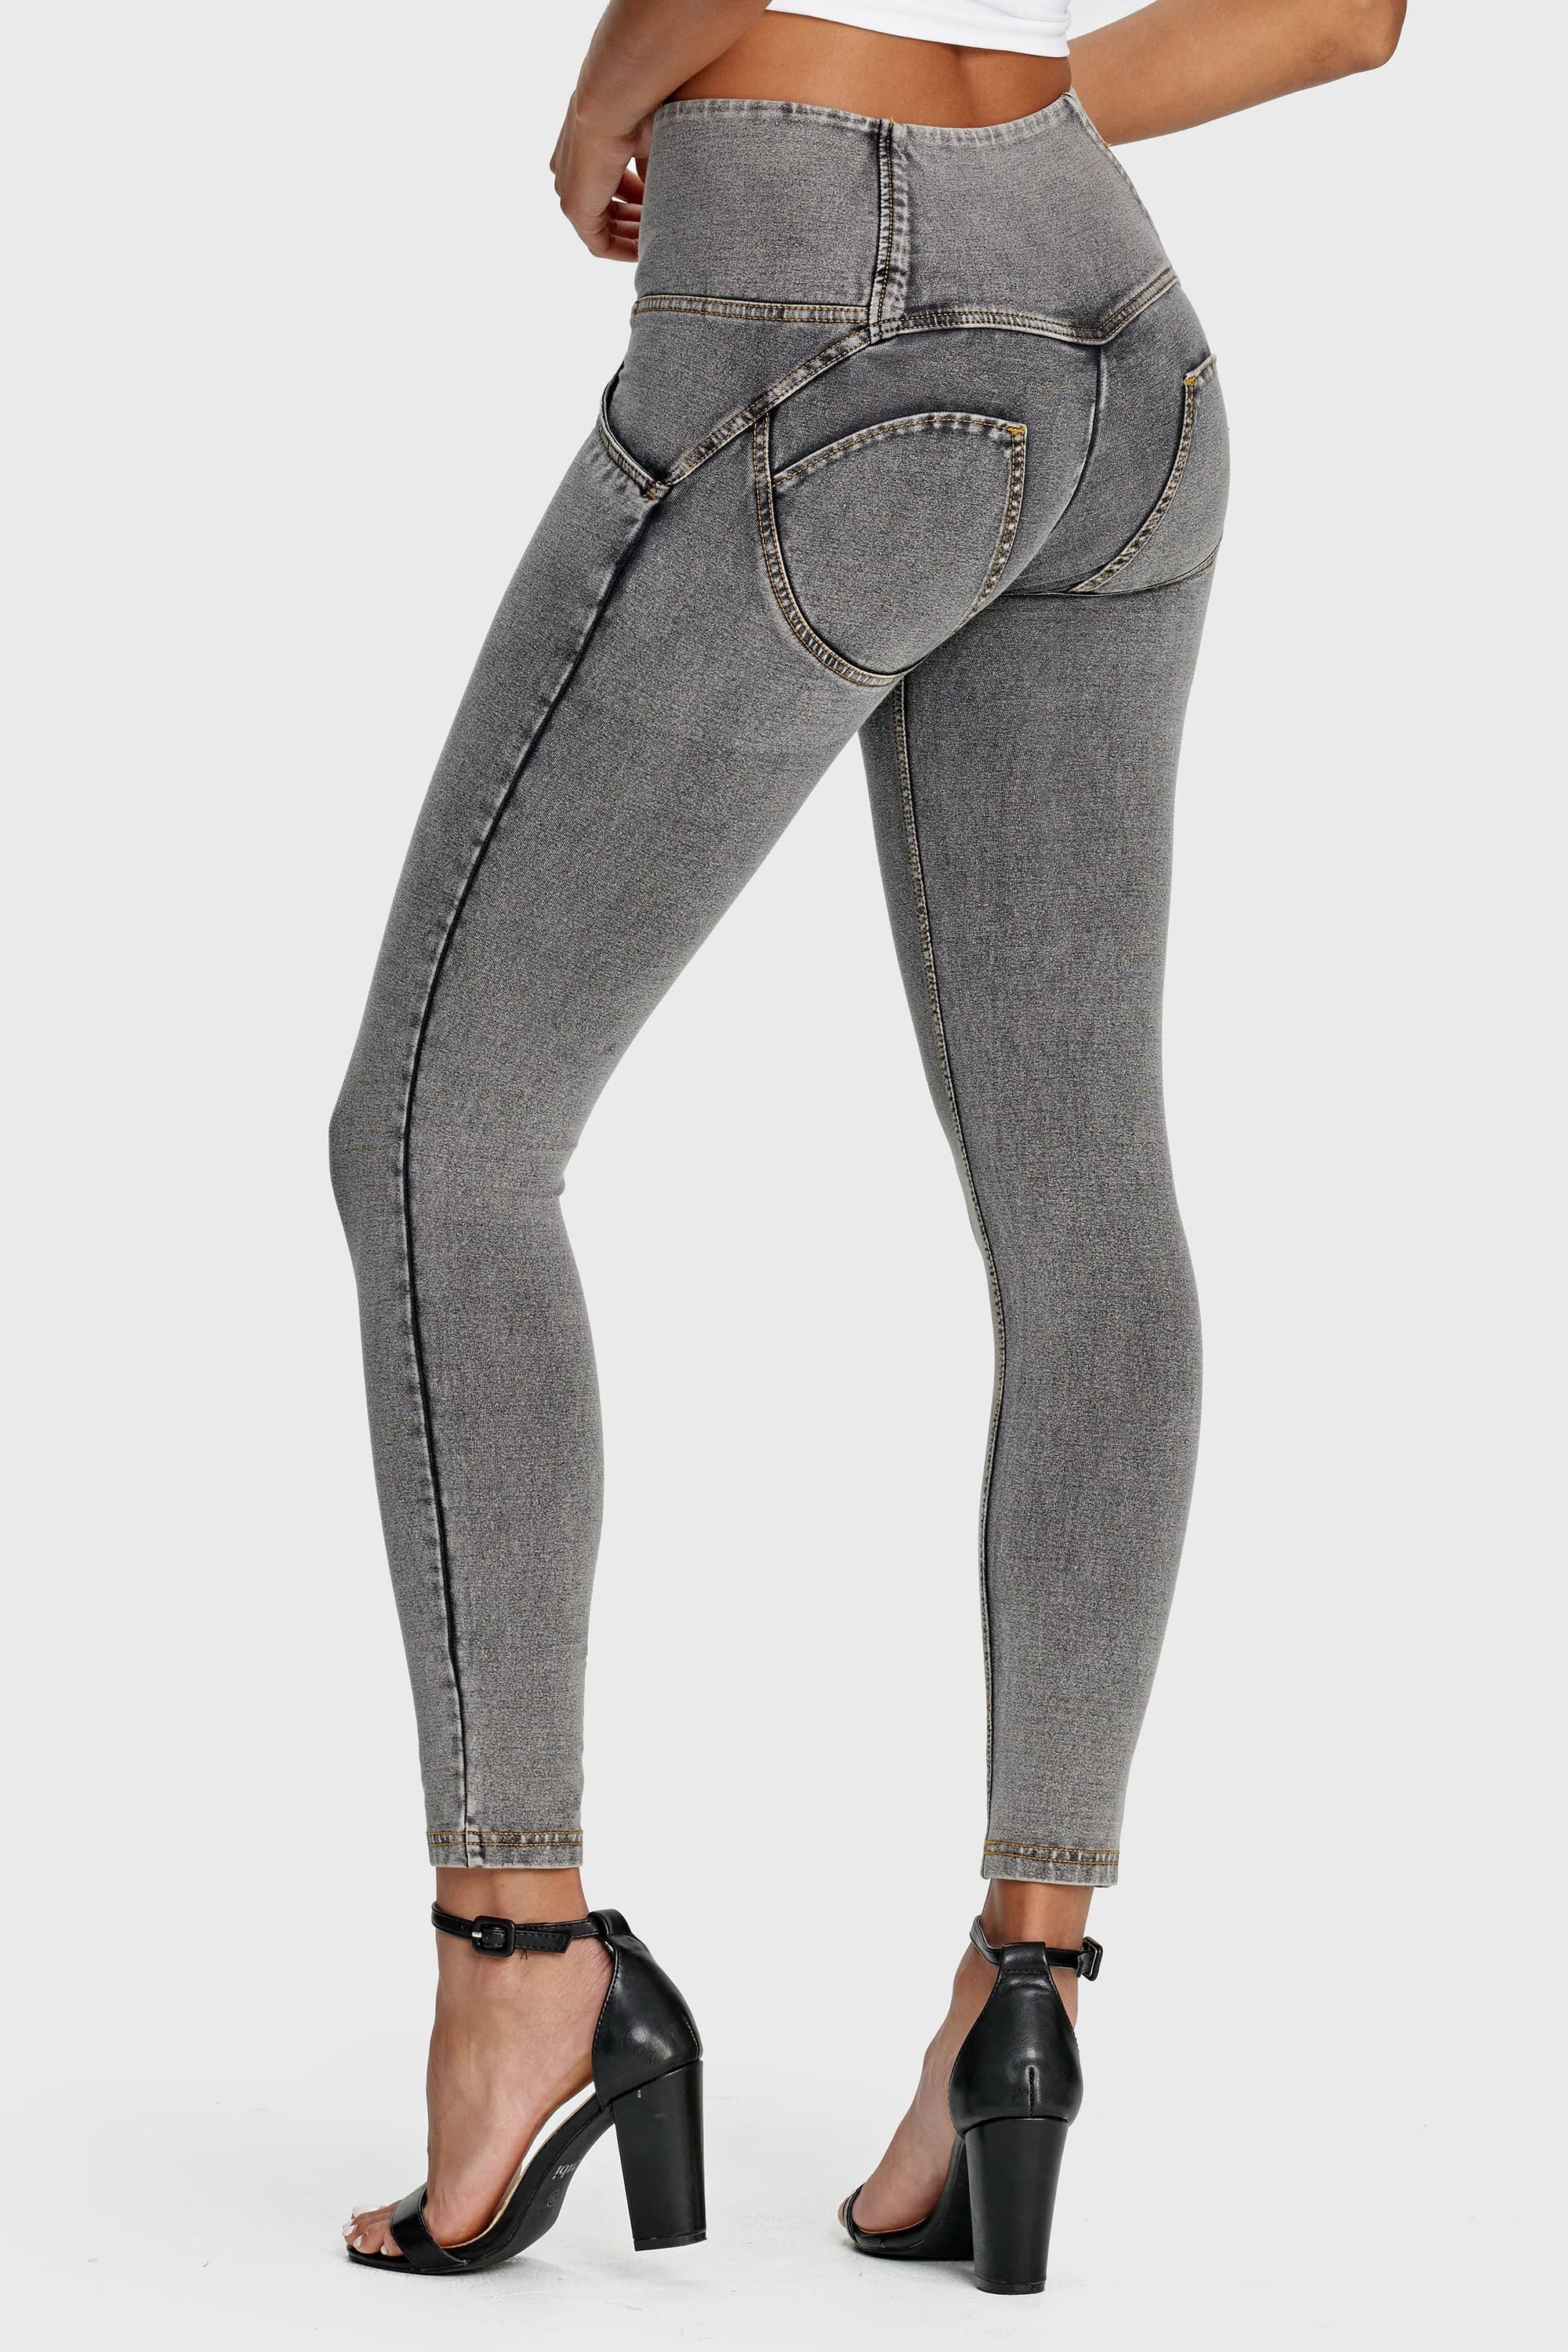 WR.UP® Denim - 3 Button High Waisted - Petite Length - Grey + Yellow Stitching 7